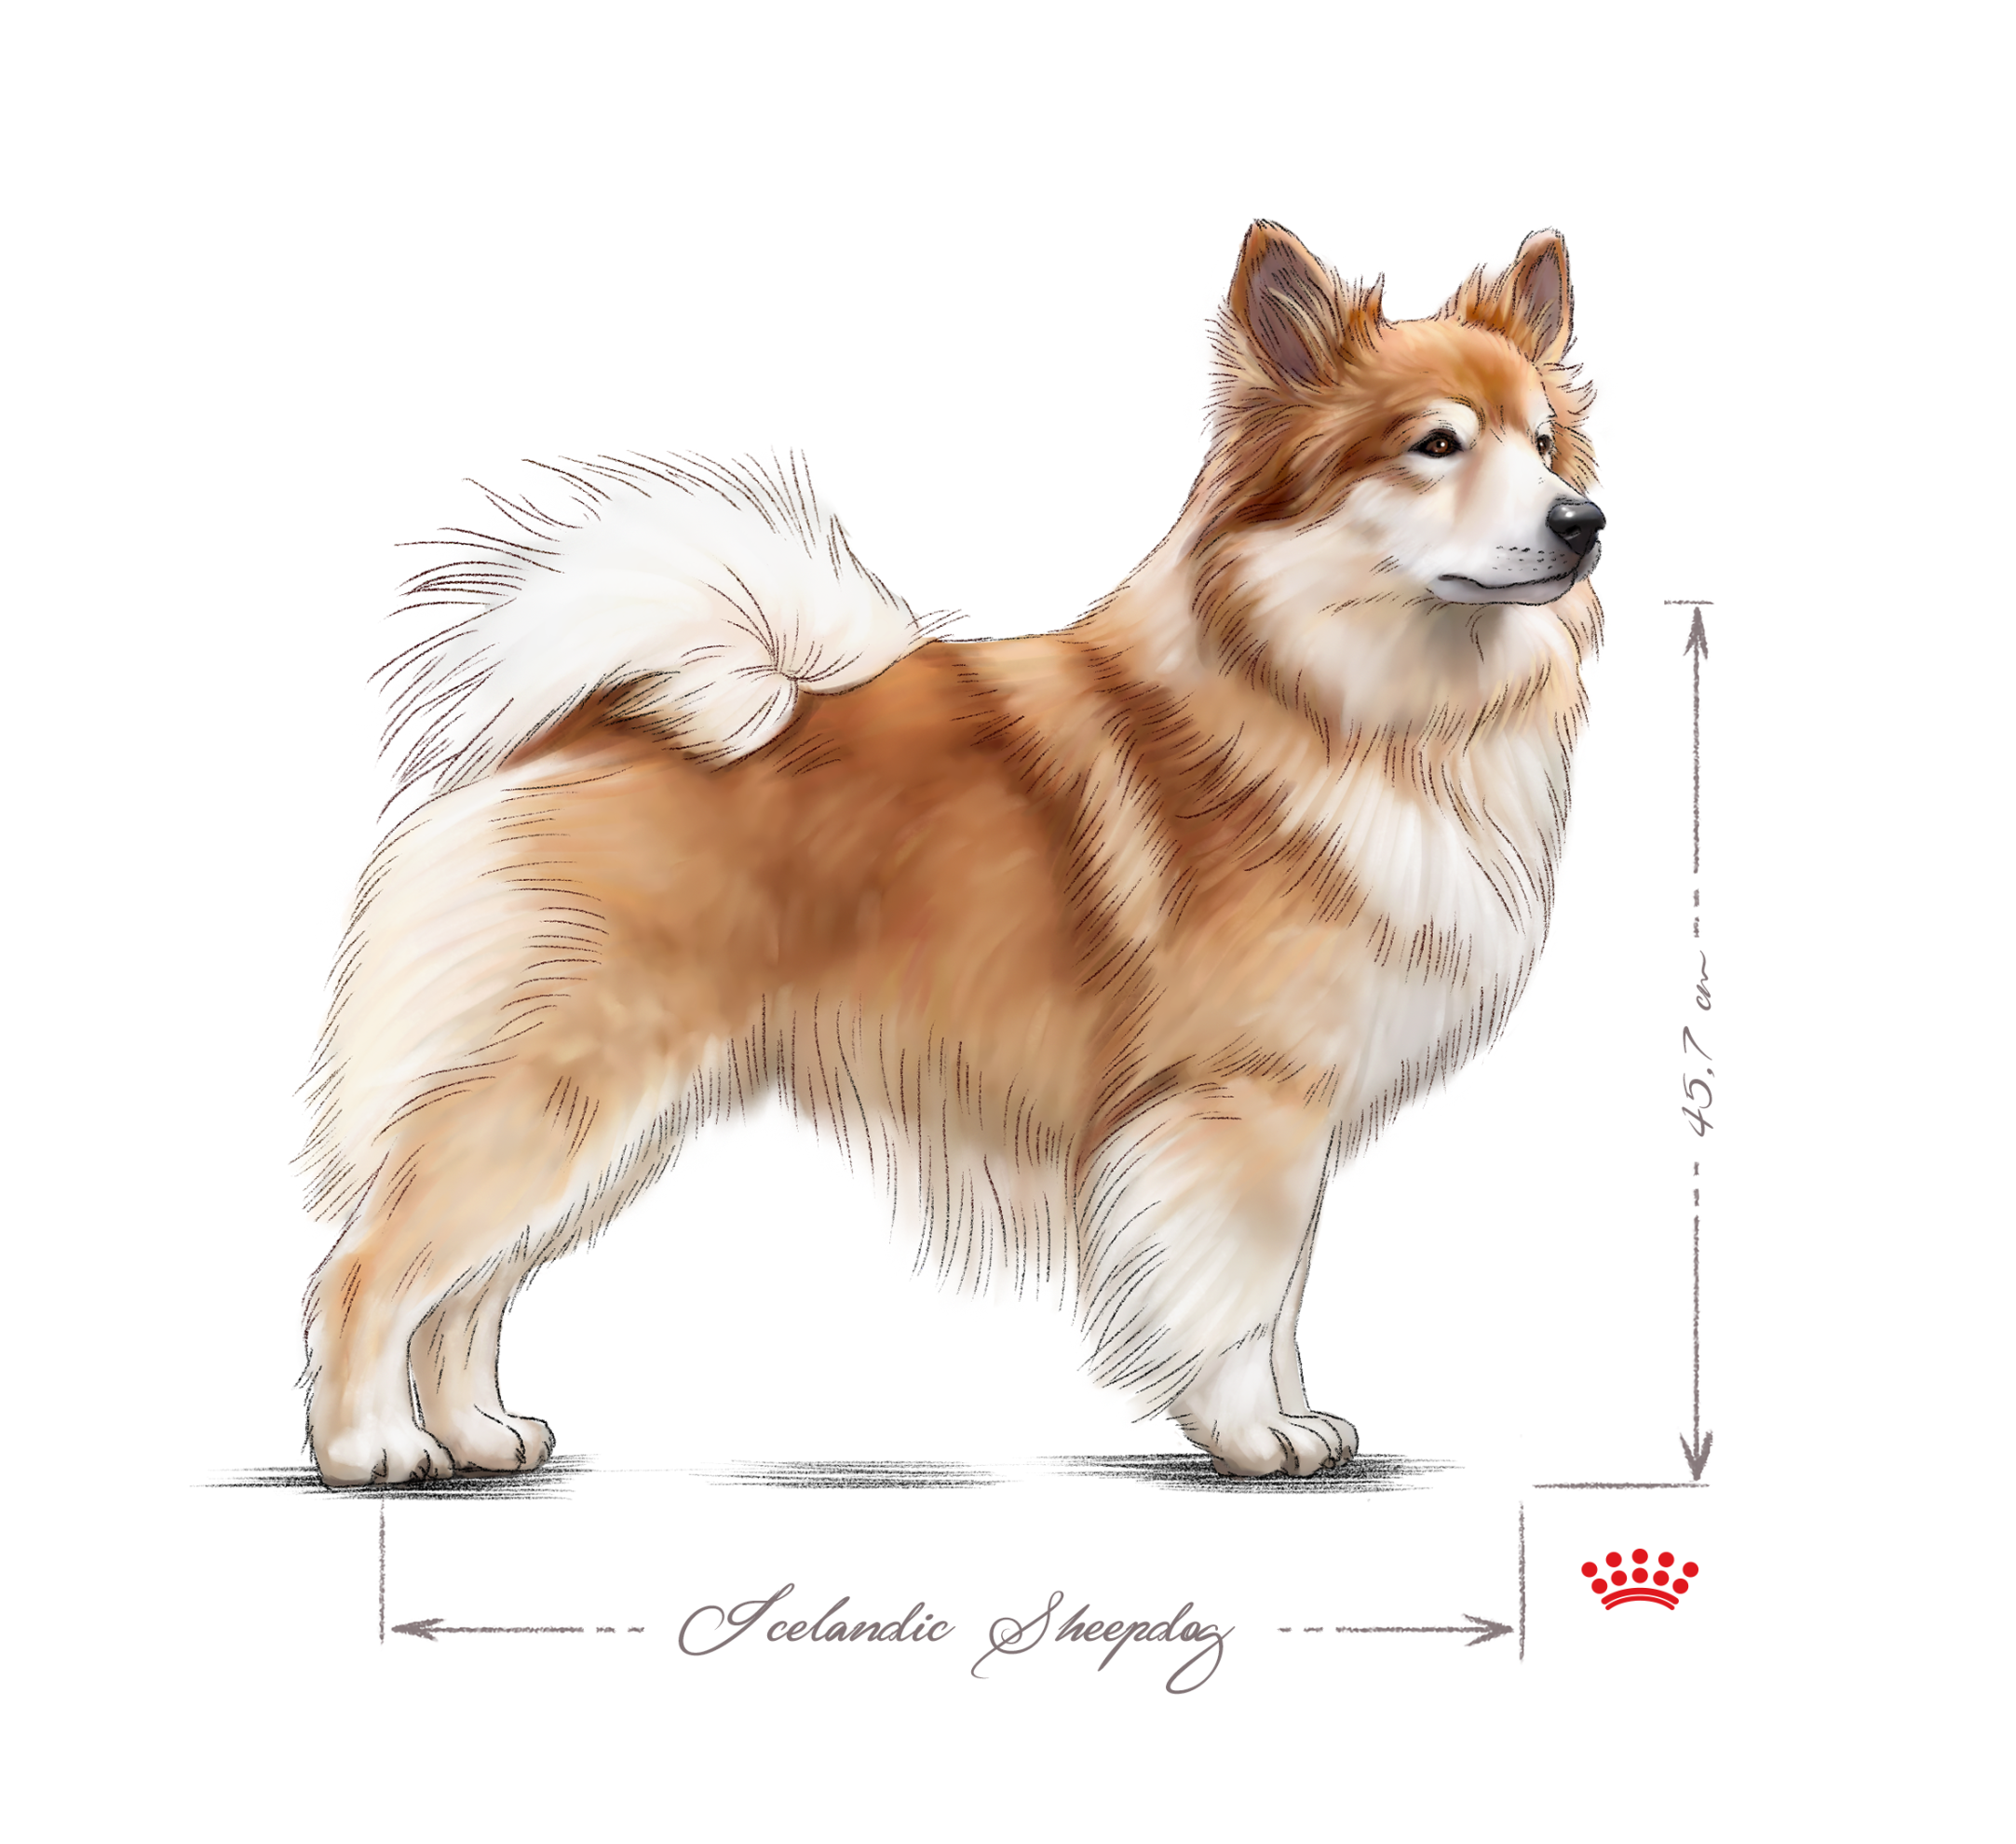 Icelandic Sheepdog adult in black and white